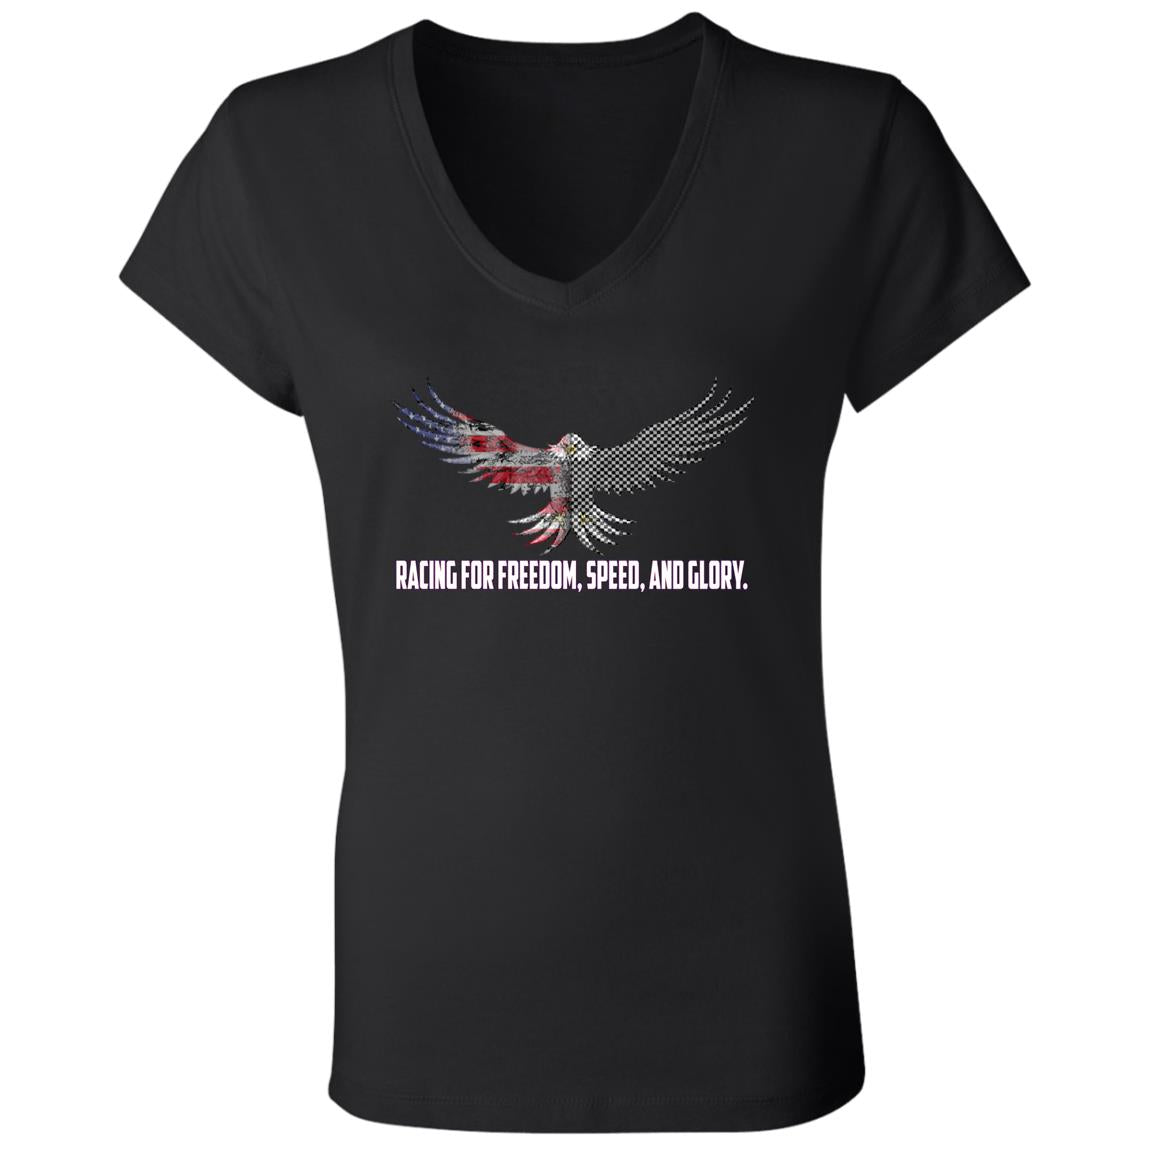 Racing For Freedom, Speed, And Glory Ladies' Jersey V-Neck T-Shirt